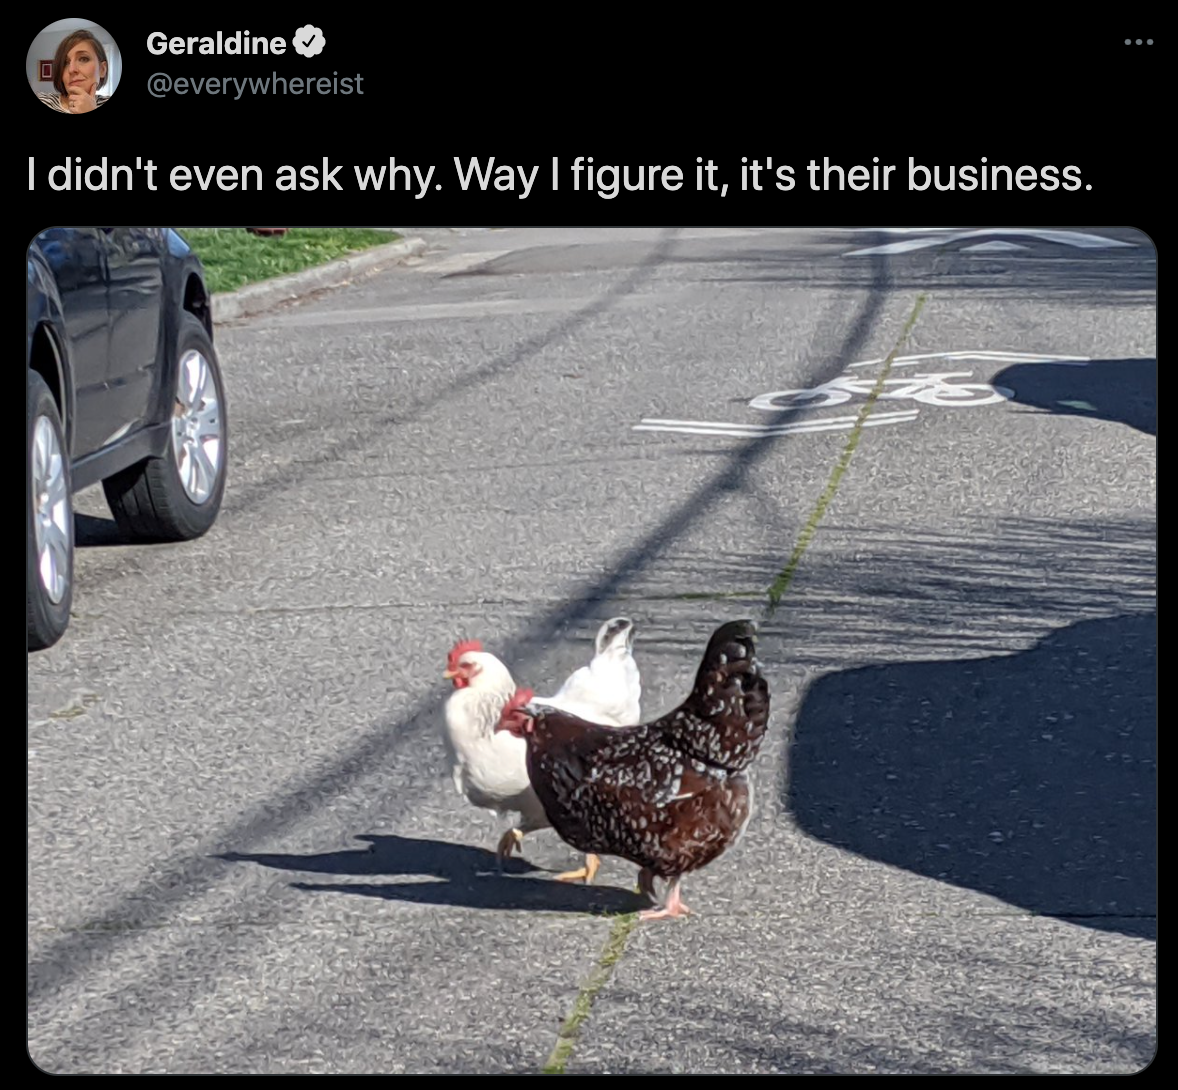 funny twitter jokes - I didn't even ask why. Way I figure it, it's their business. - chickens crossing the road